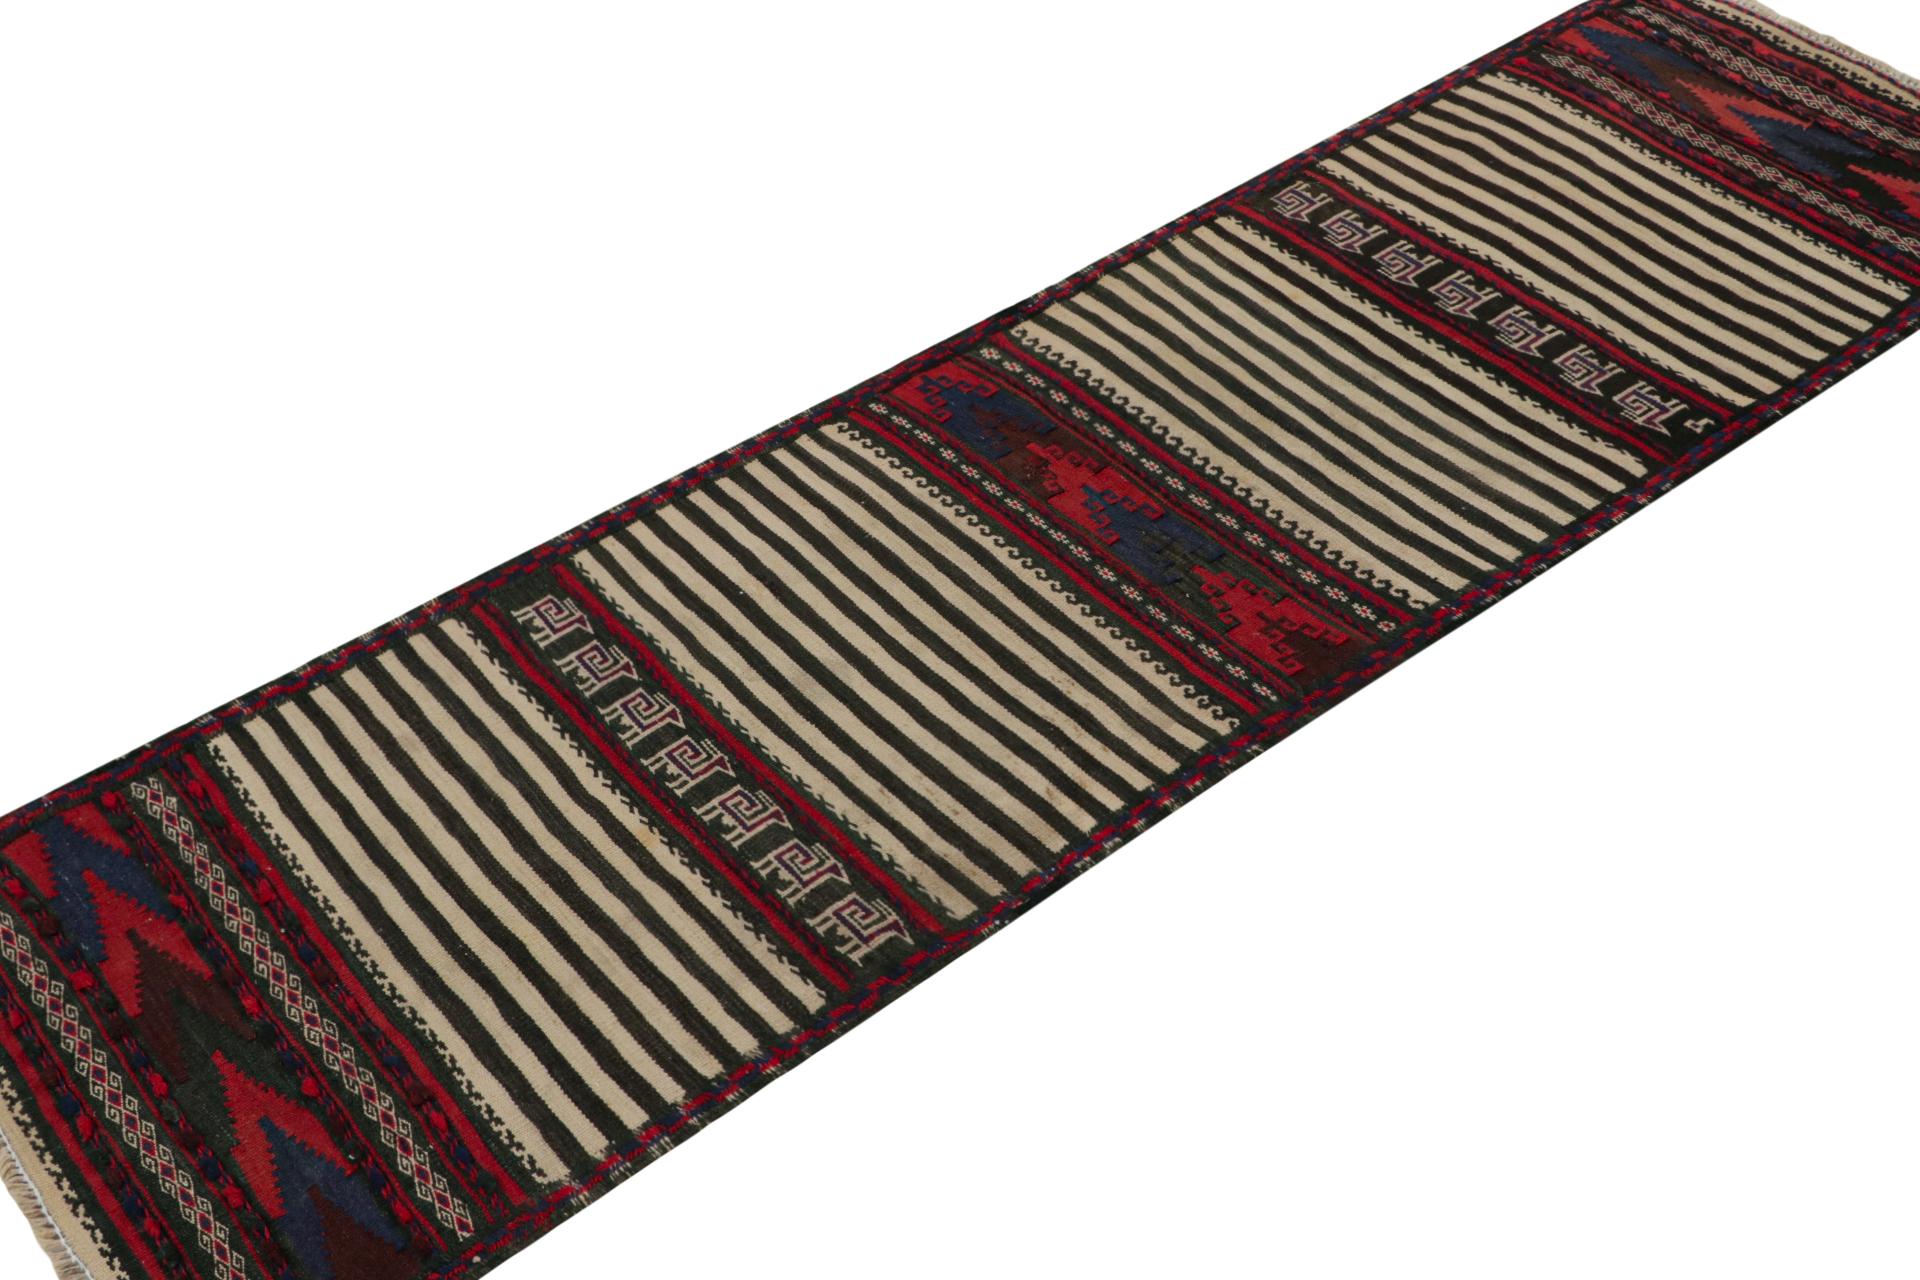 Handwoven in wool, this 2x7 vintage Afghan Baluch tribal kilim runner rug, circa 1950-1960, is an exquisite tribal piece that was often used as table covers in nomadic daily life, much similar to Persian Sofreh Kilims. 

On the Design: 

Tribal